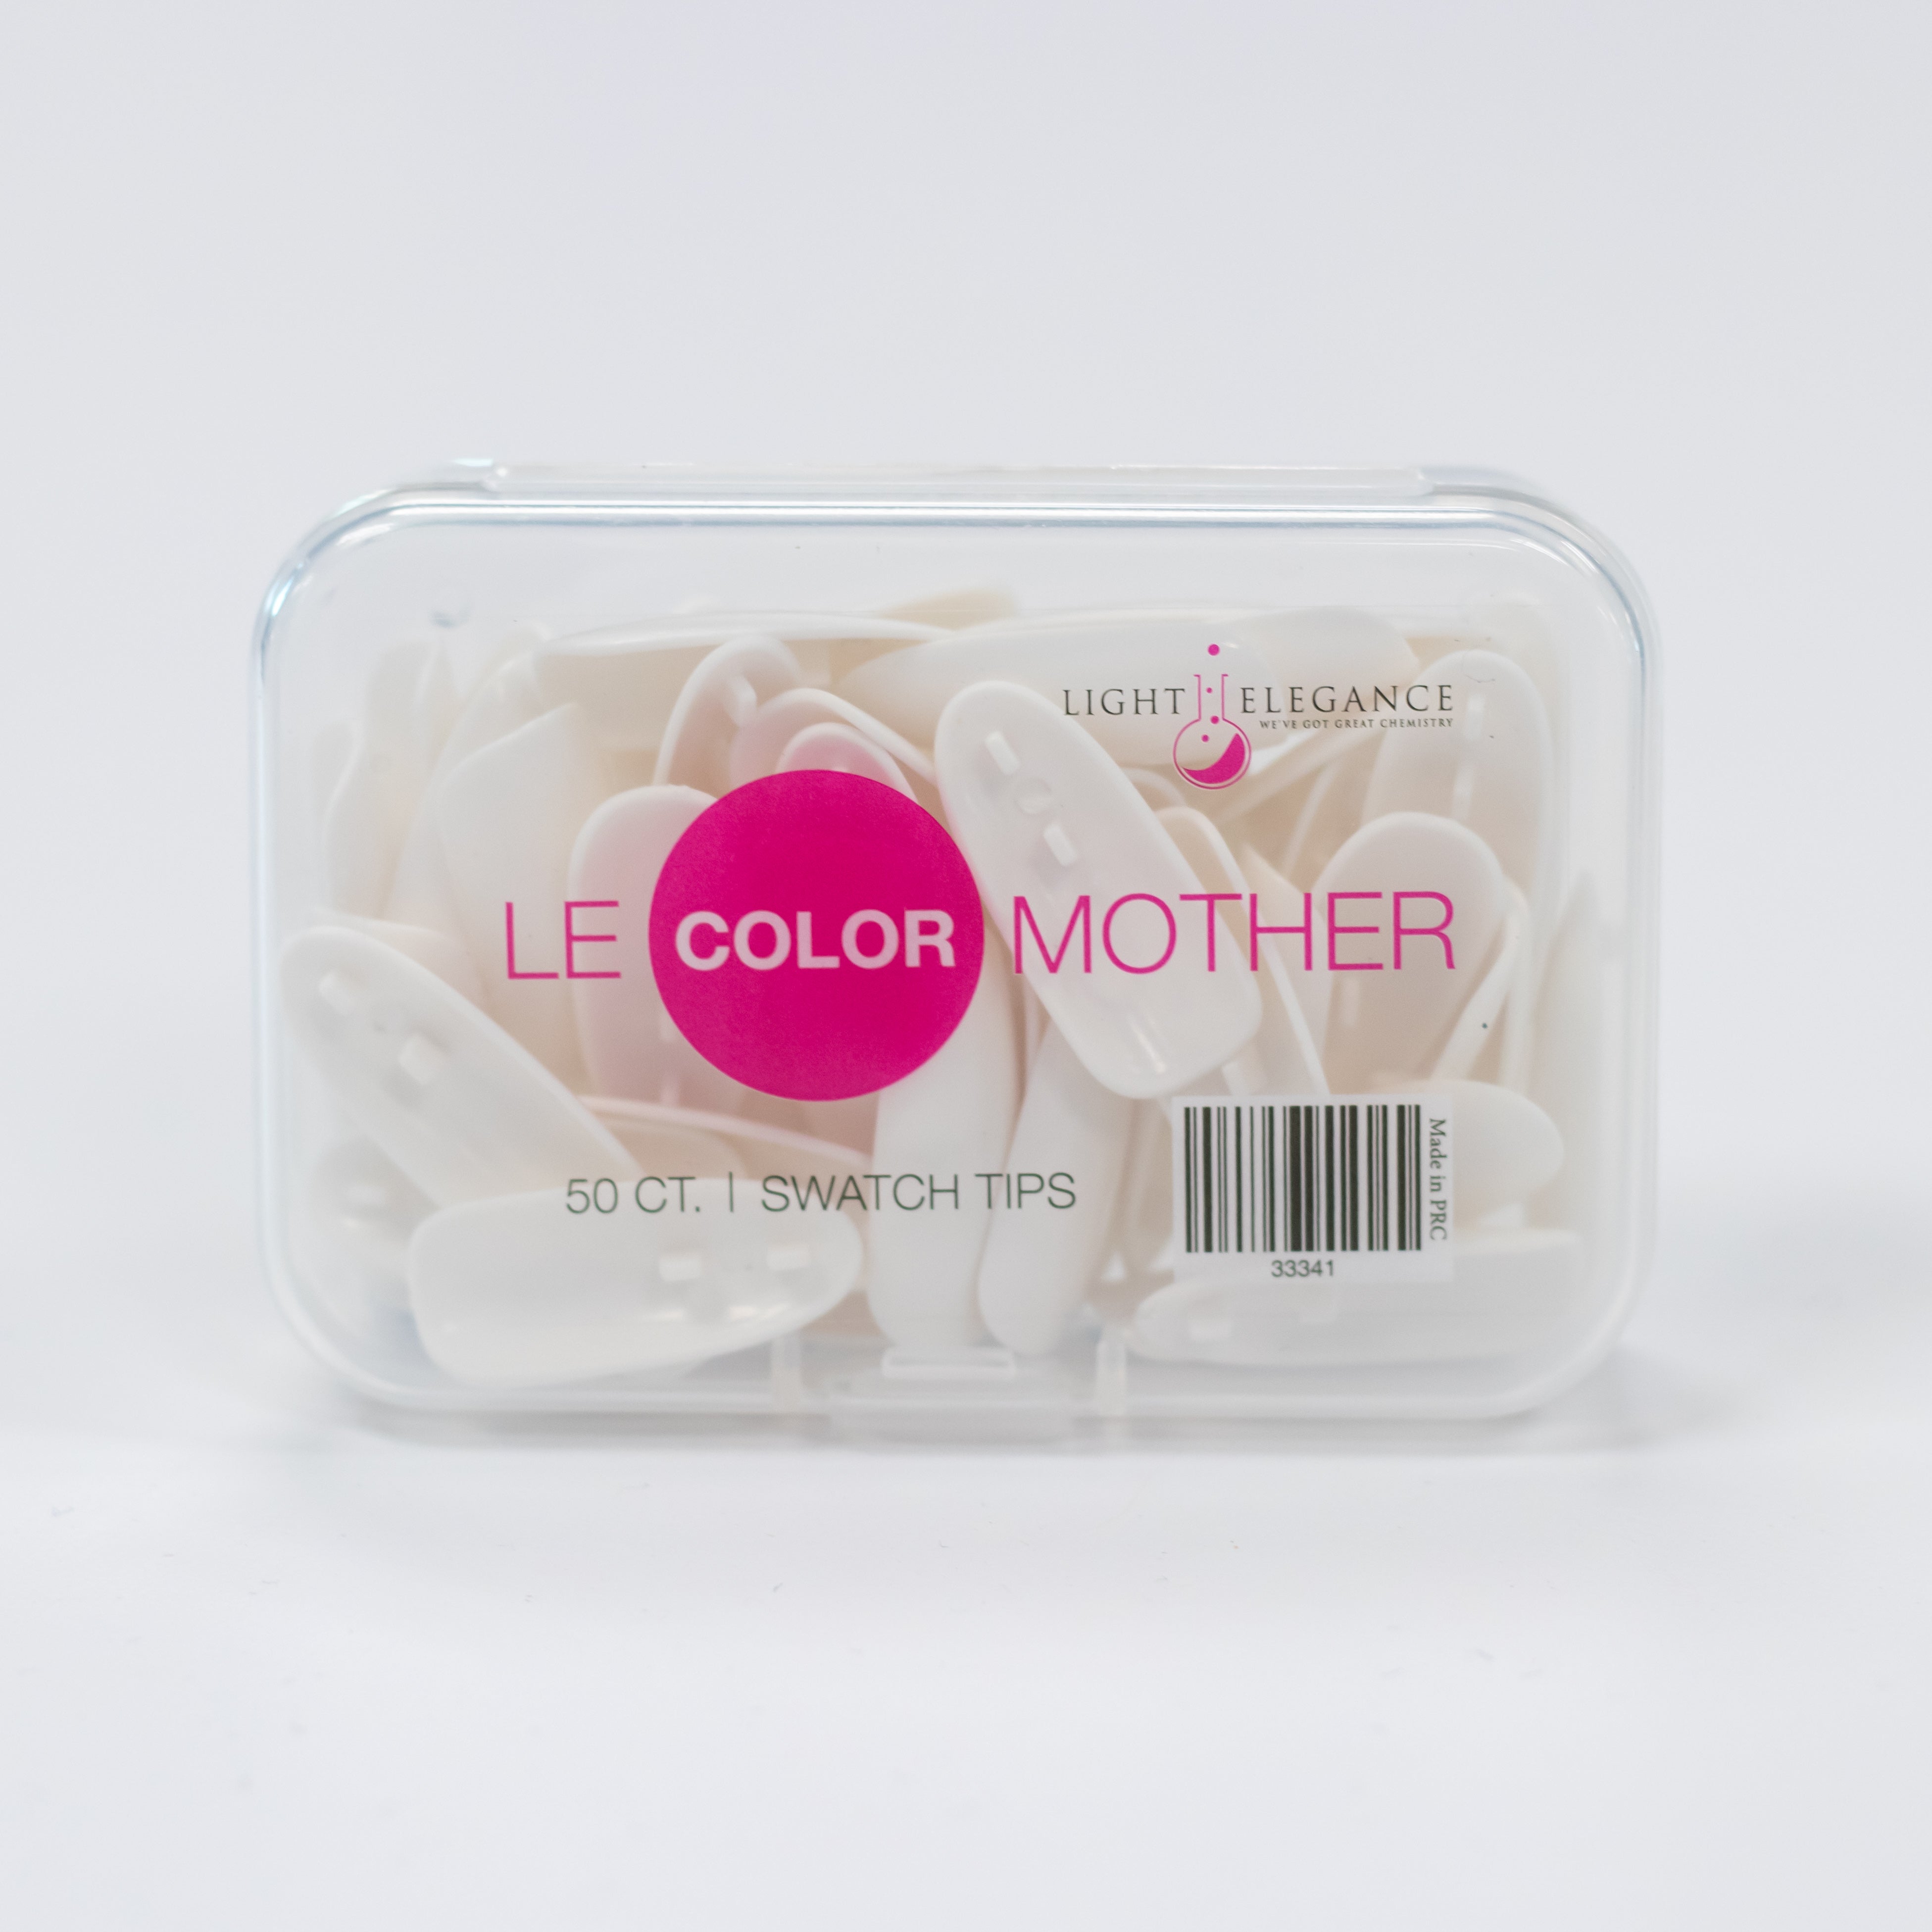 LE Color Mother Swatch Tip Refills